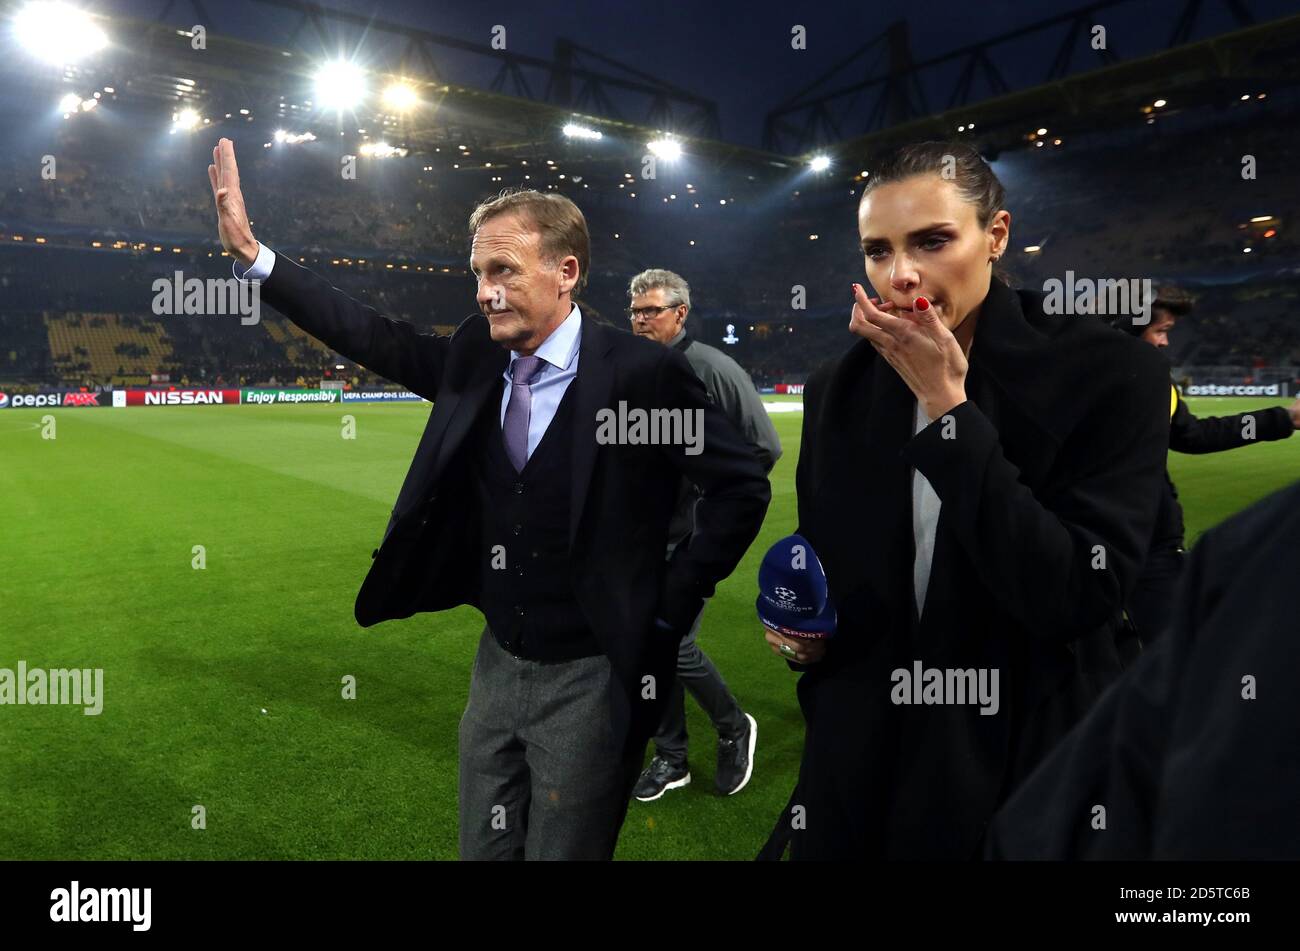 Borussia Dortmund's CEO Hans-Joachim Watzke waves to the fans after the game is postponed Stock Photo